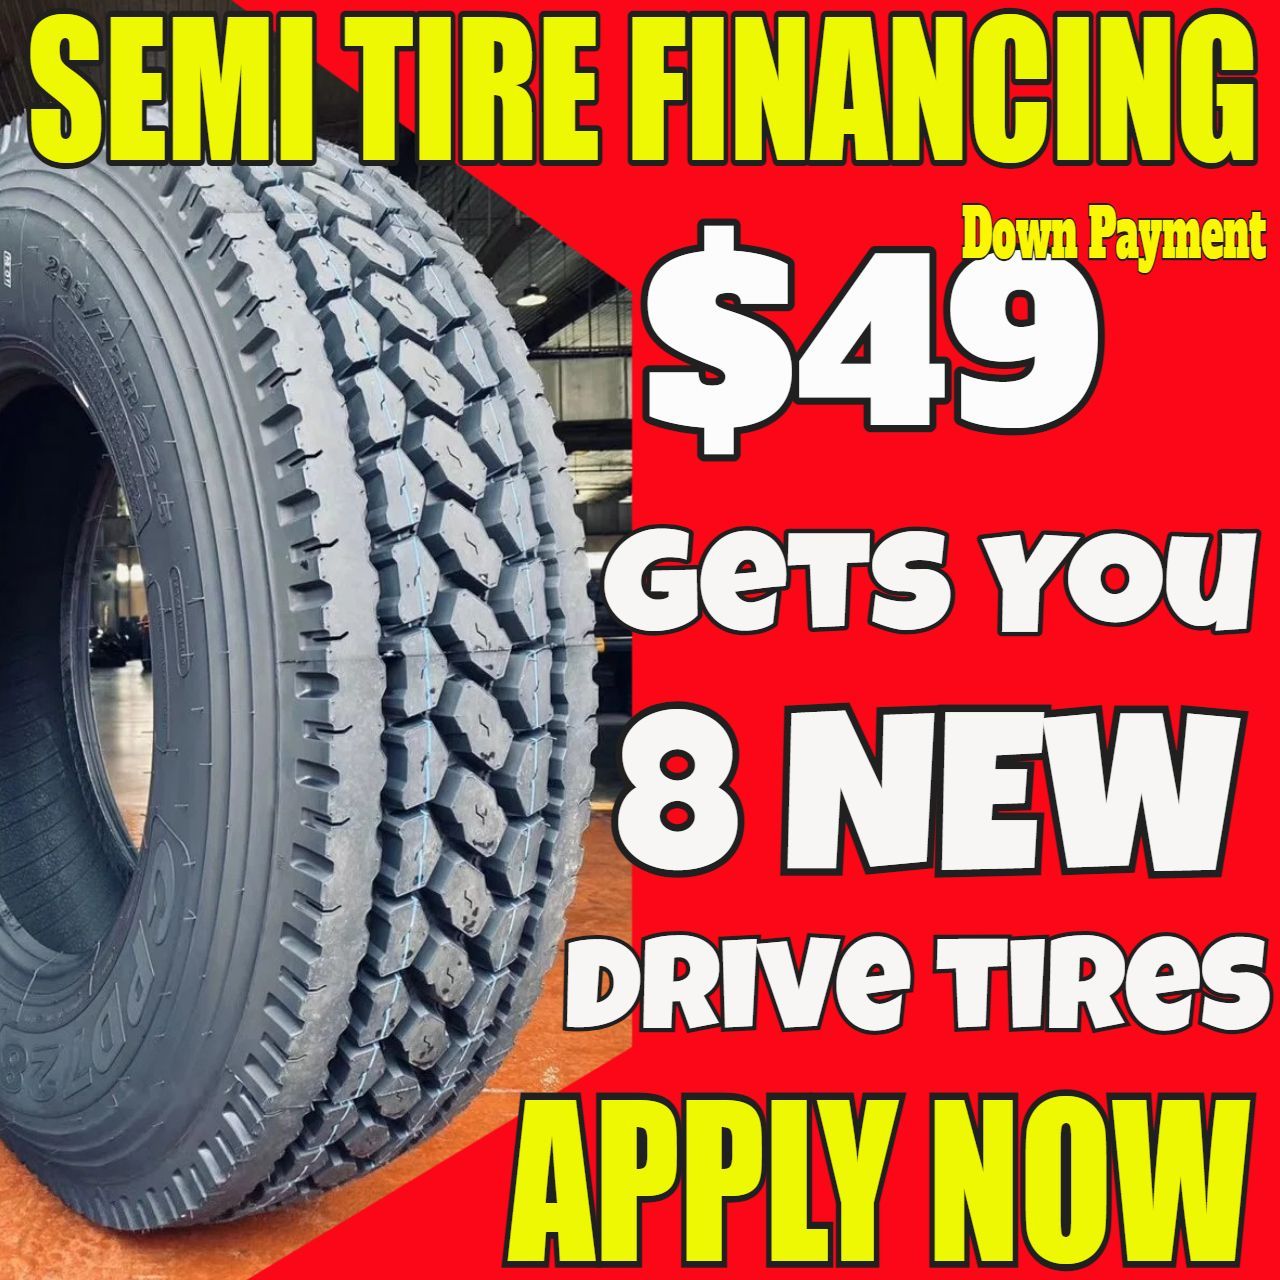 Commercial truck semi tires Lexington, KY. Heavy-duty trucking tires at cheap auto prices. Hopkinsville, KY - Nicholasville, KY - Elizabethtown, KY CLICK 2 FINANCE